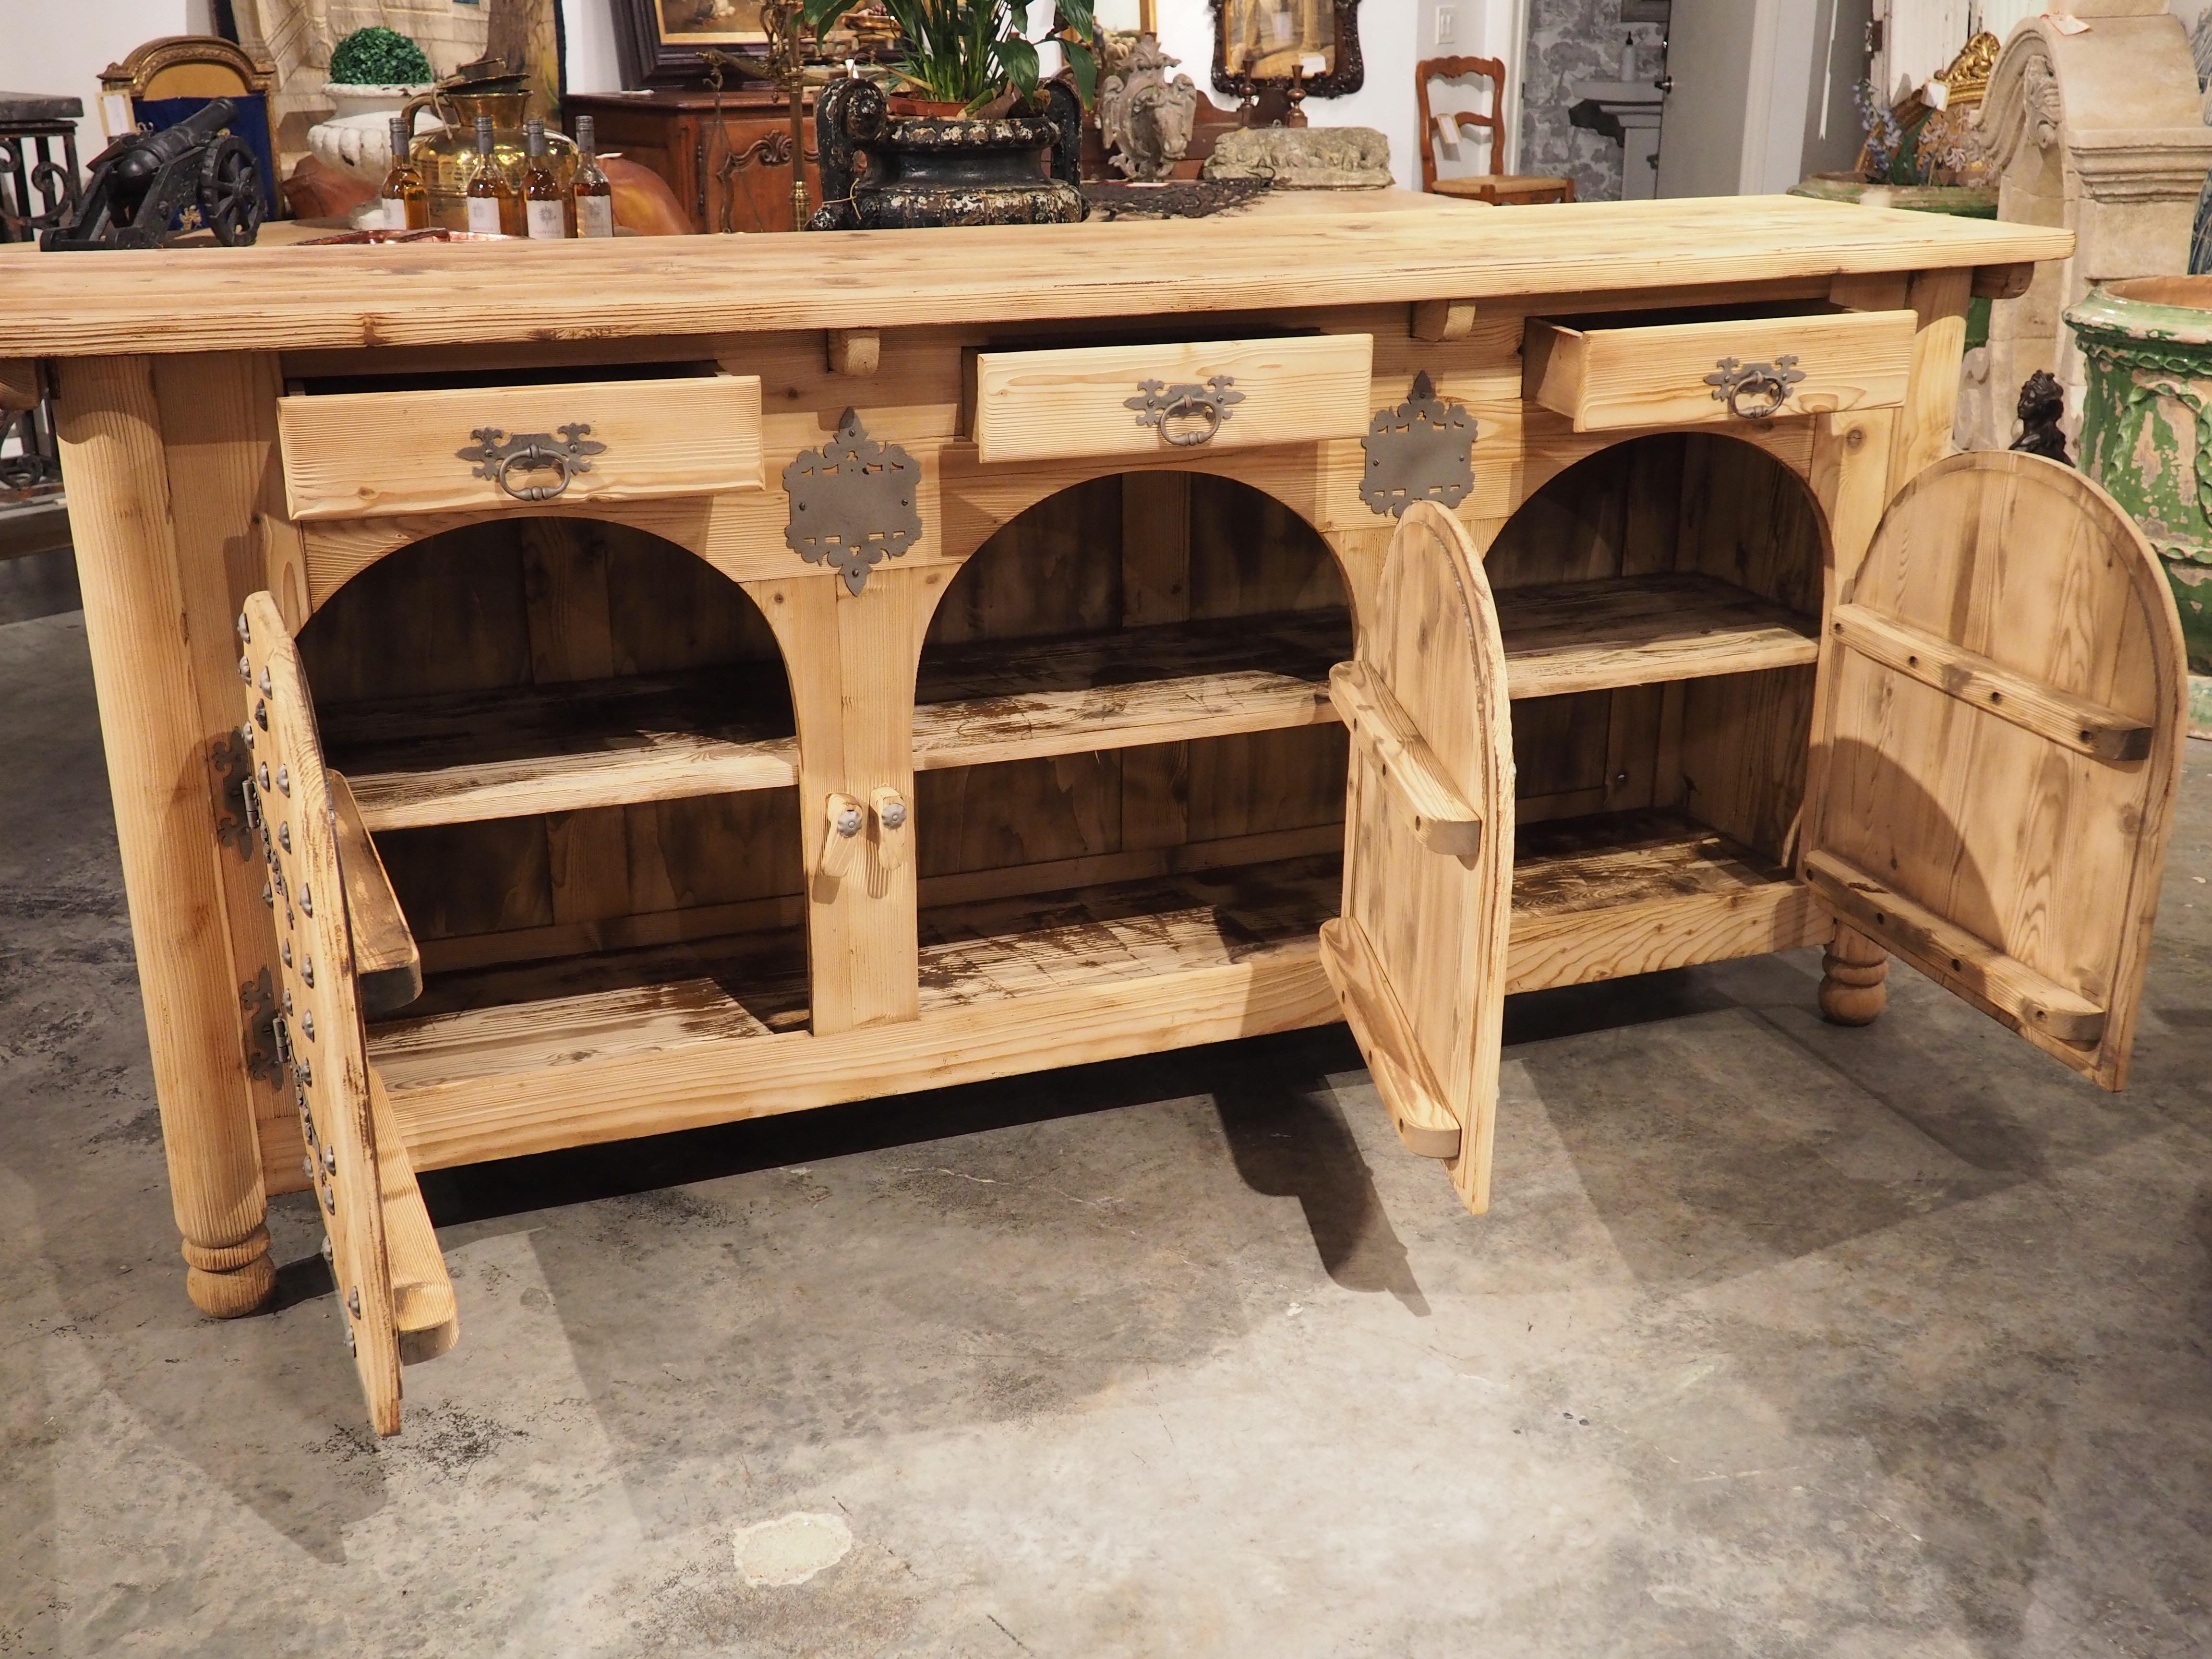 Stripped Pine Credenza from Spain with Arched Doors and Decorative Nailheads 9